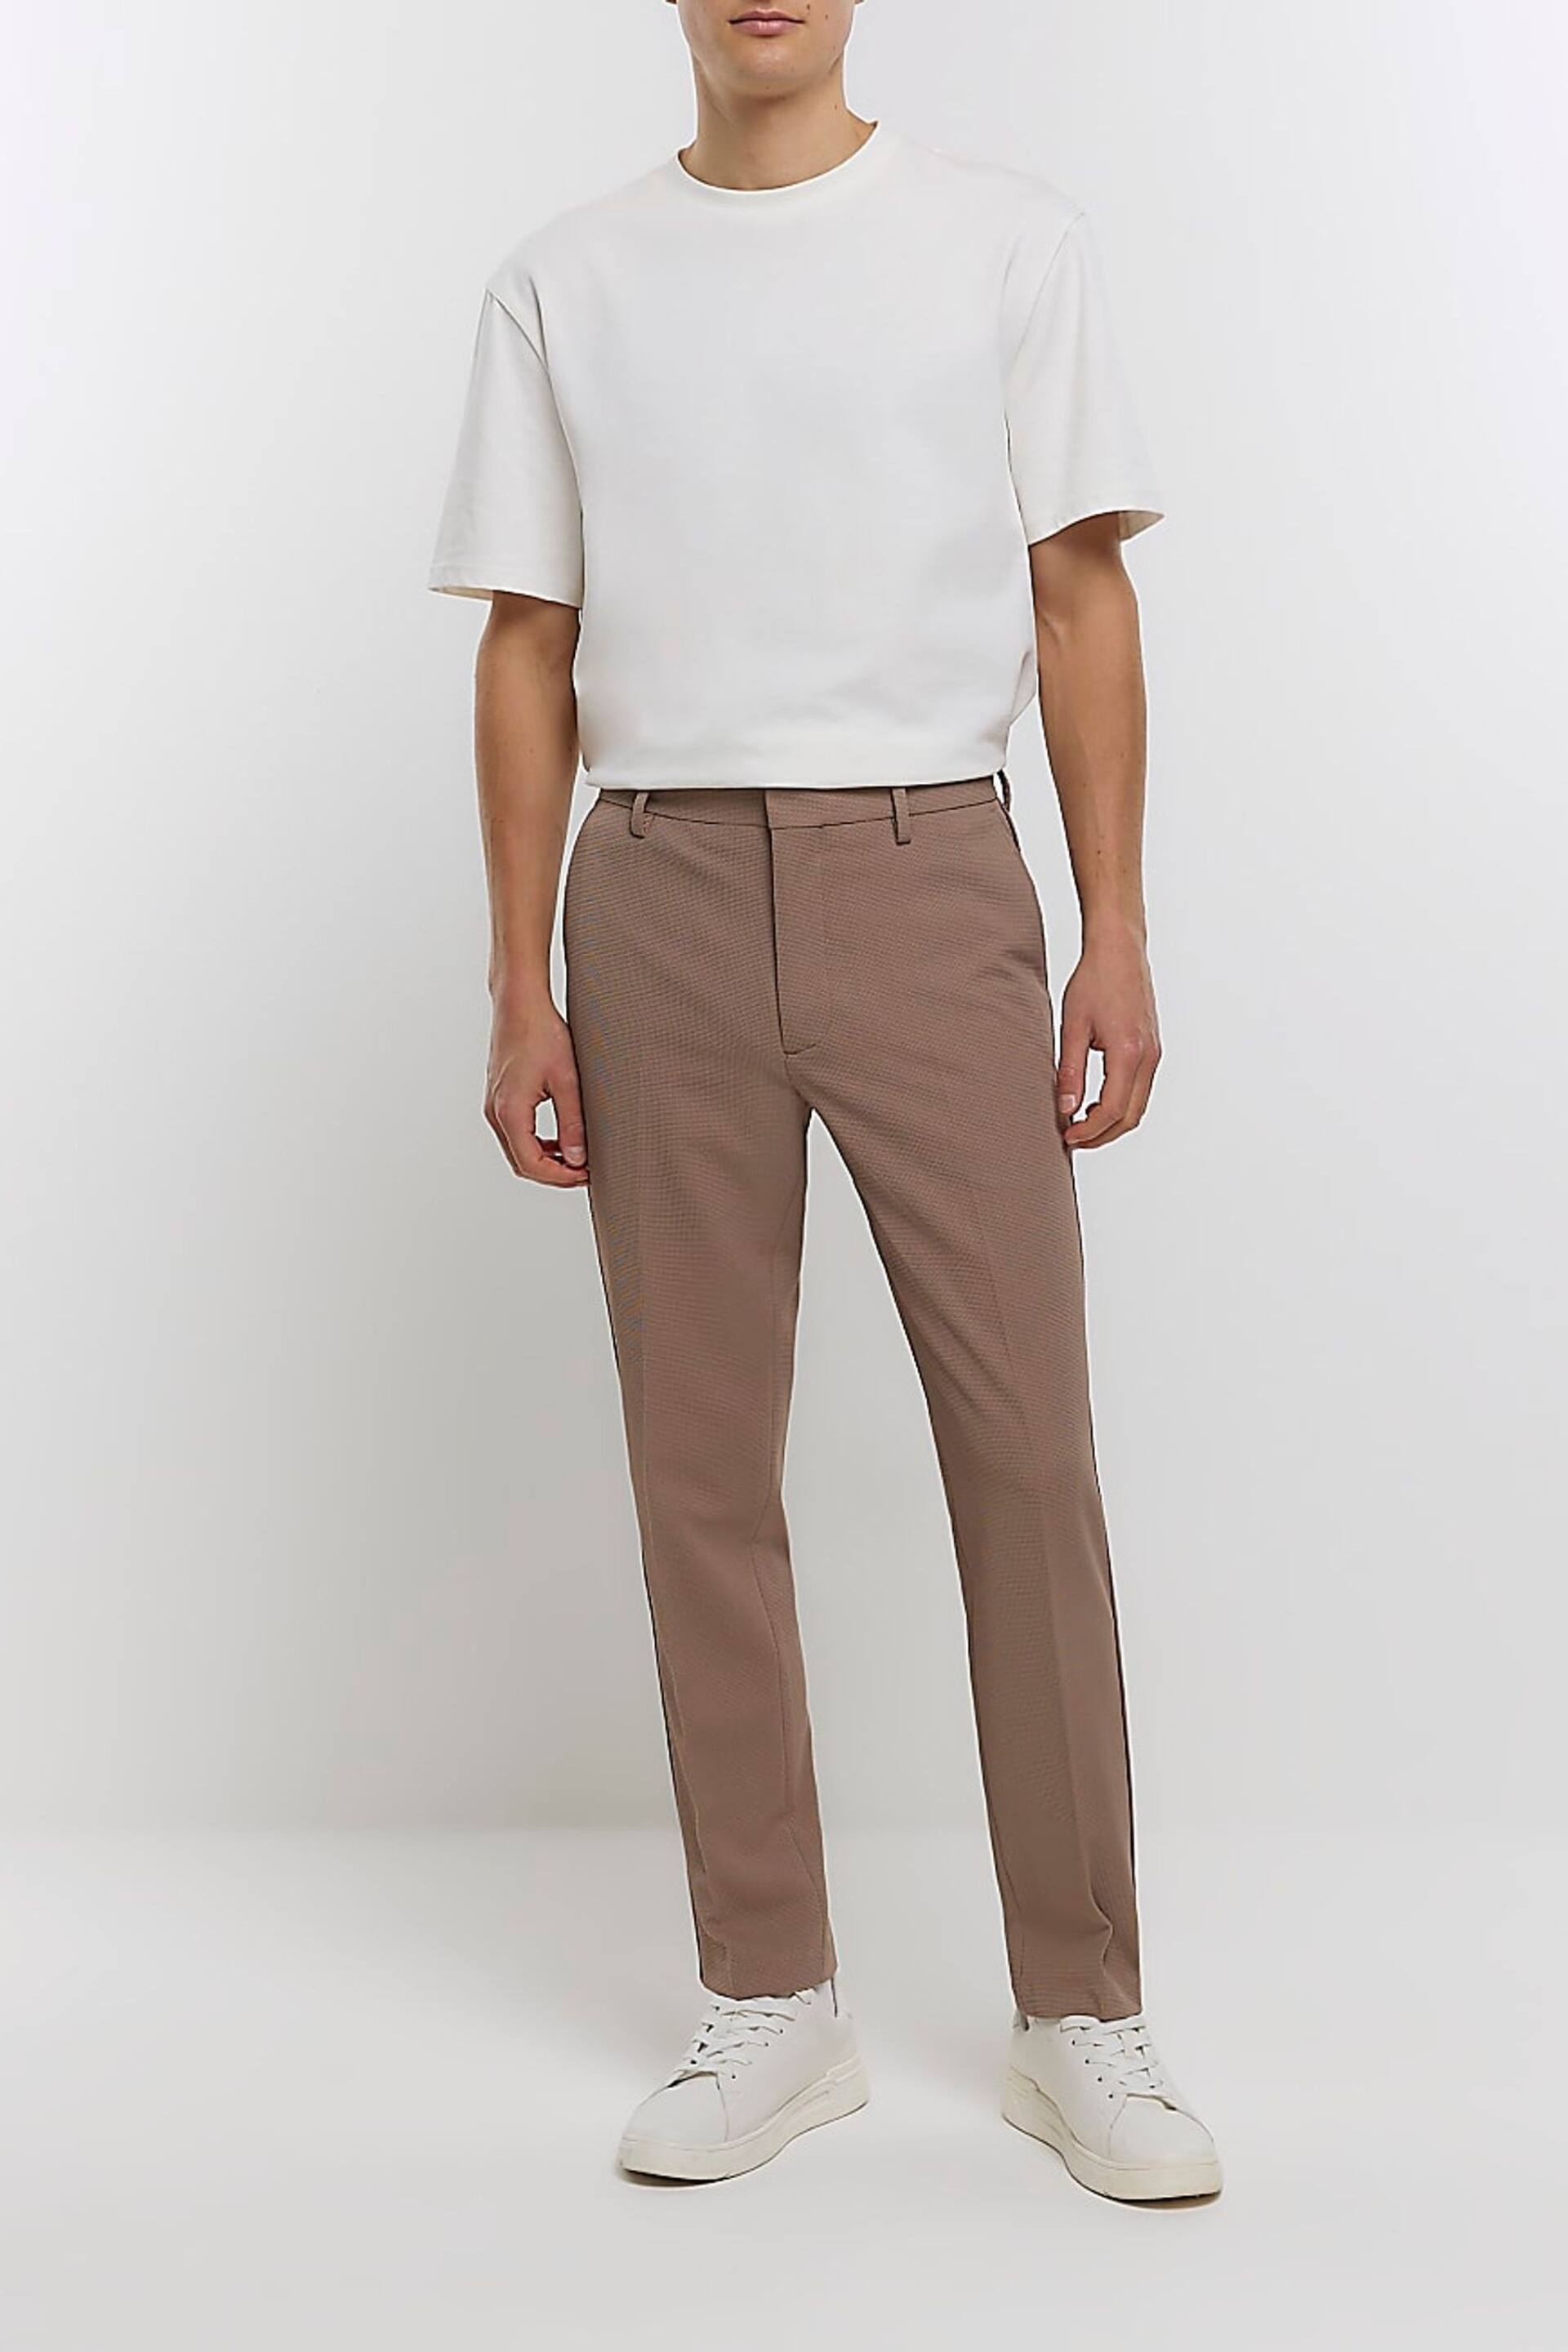 River Island Brown Waffle Smart Trousers - Image 2 of 6